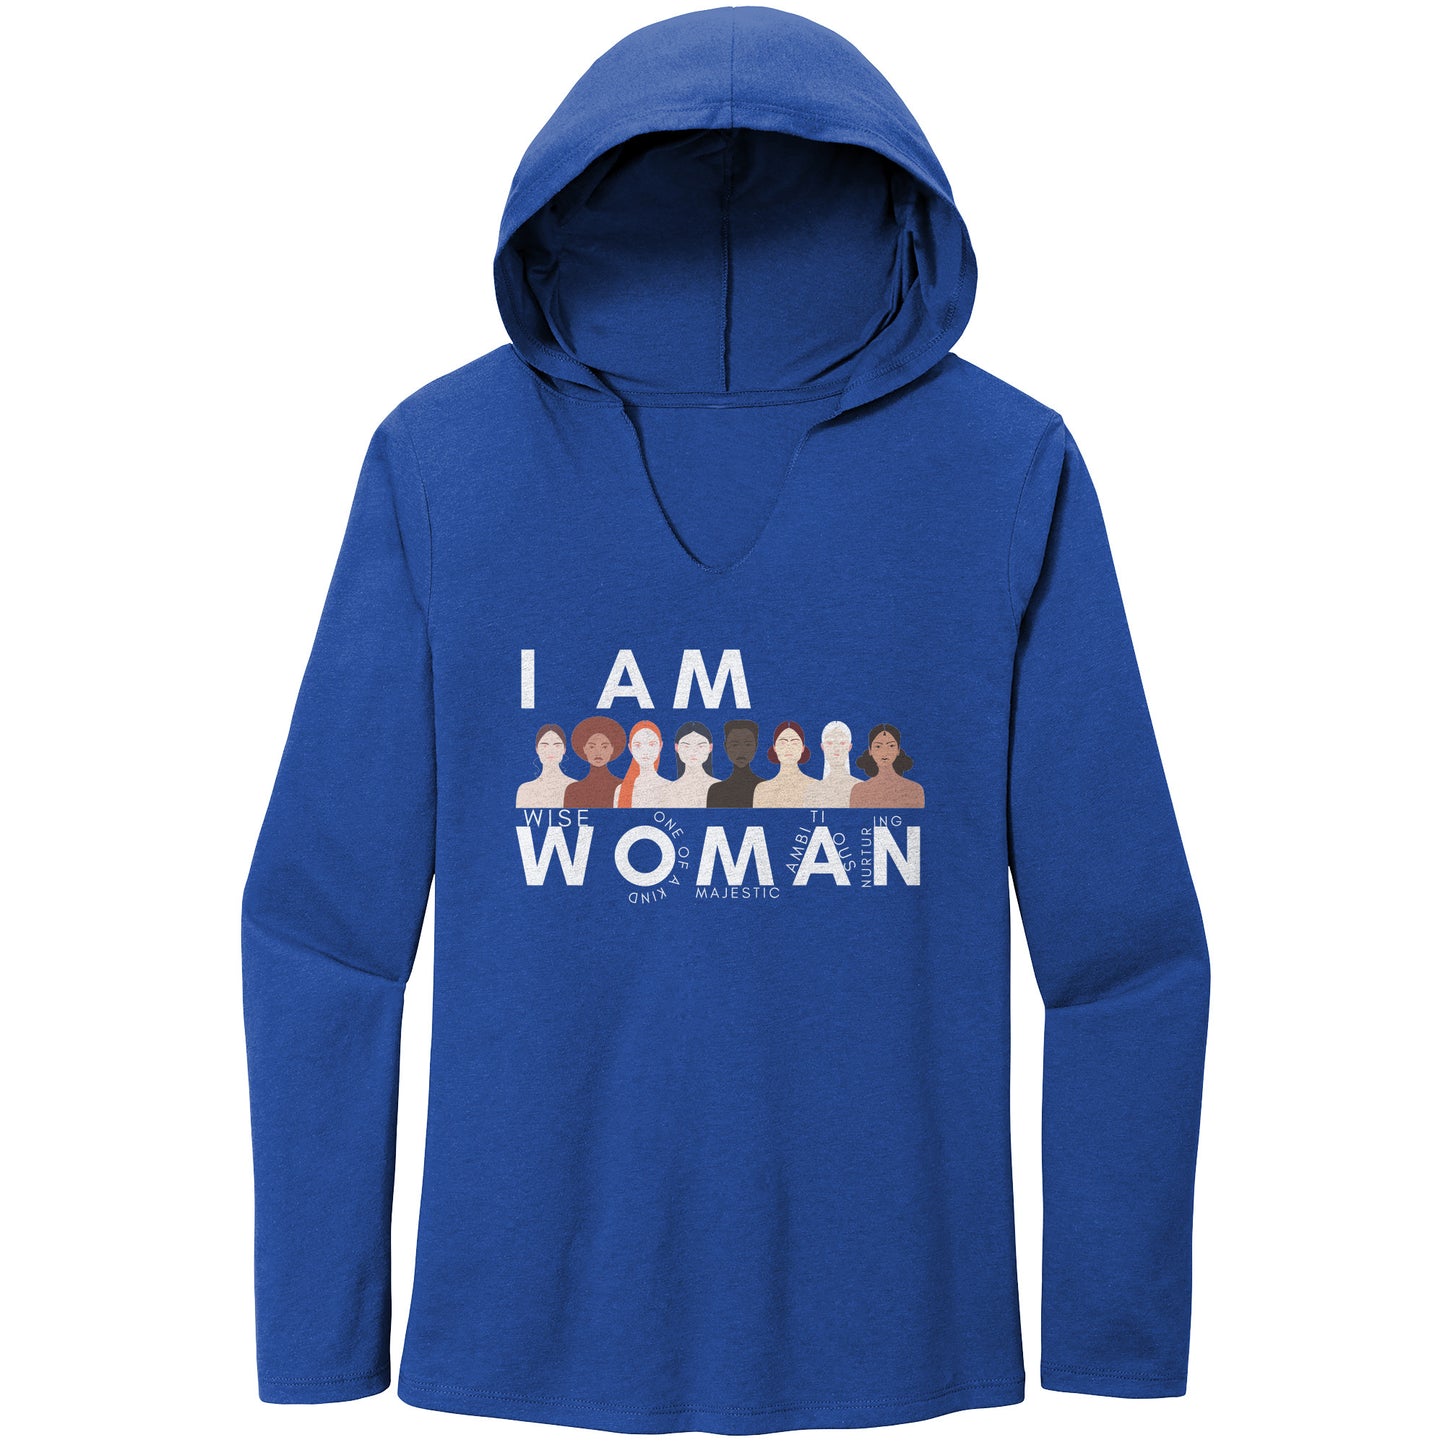 I AM WOMAN District Women's Perfect Tri Hoodie